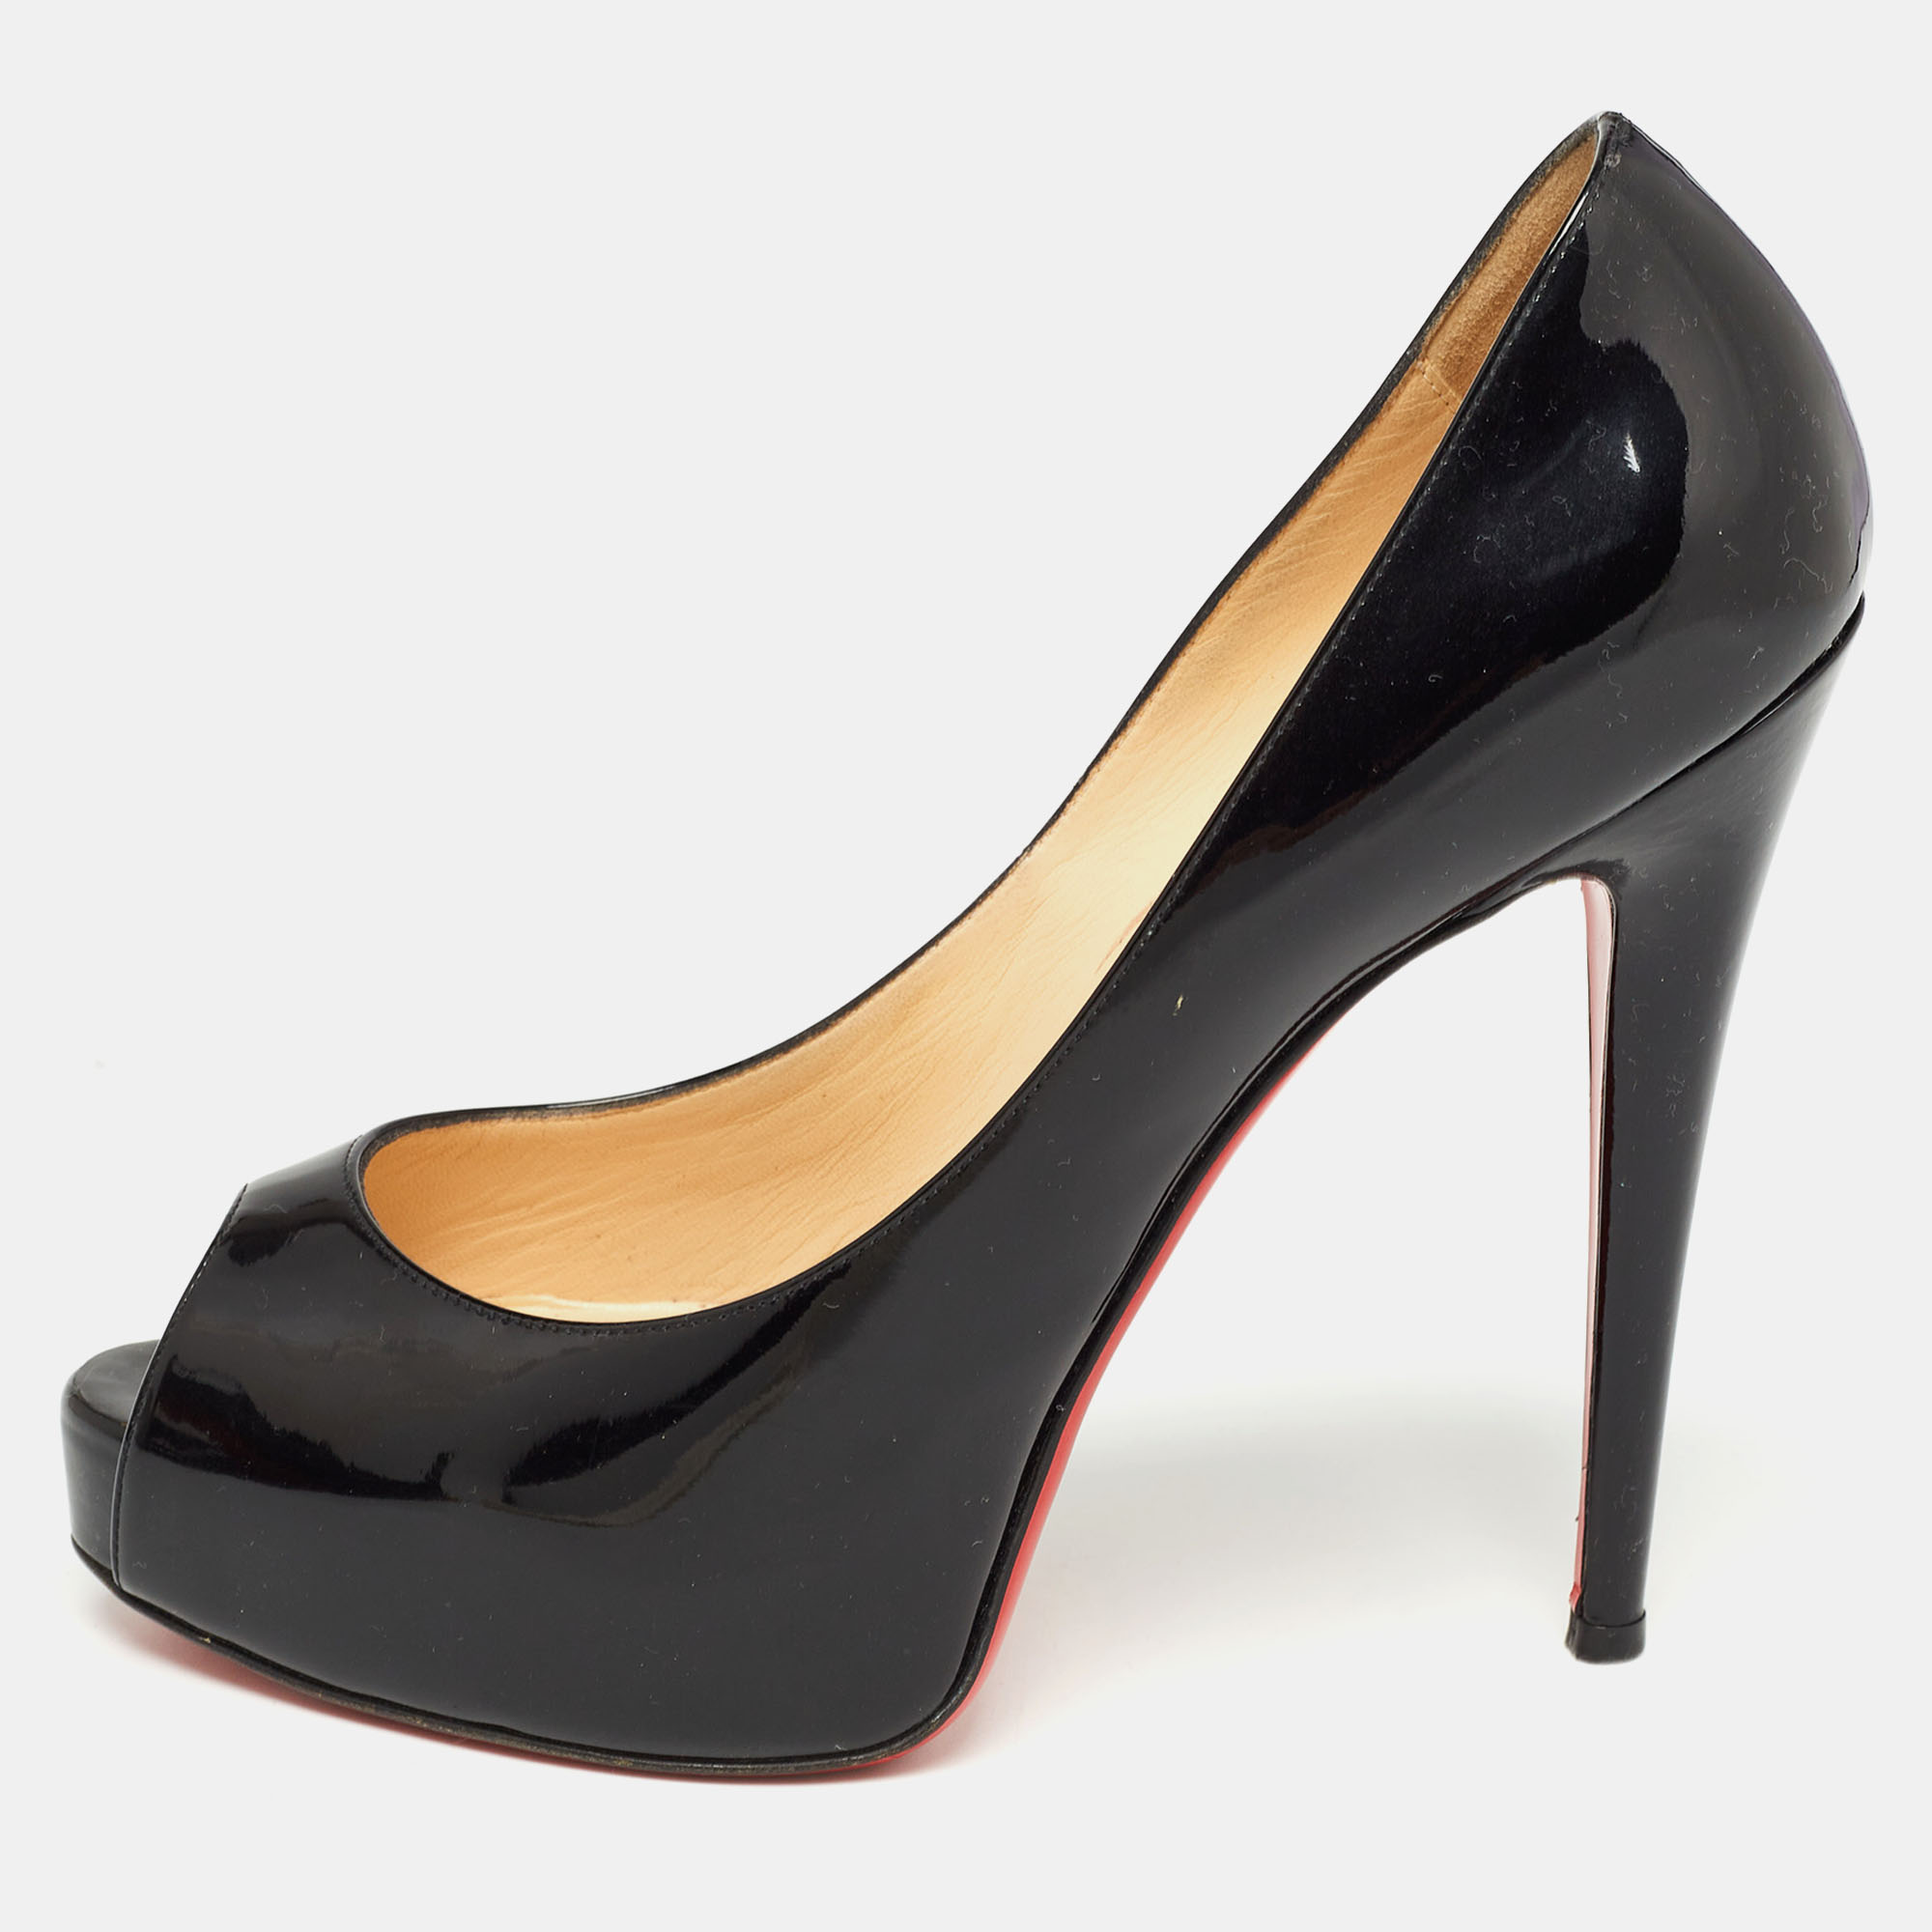 Pre-owned Christian Louboutin Black Patent Leather Very Prive Pumps Size 38